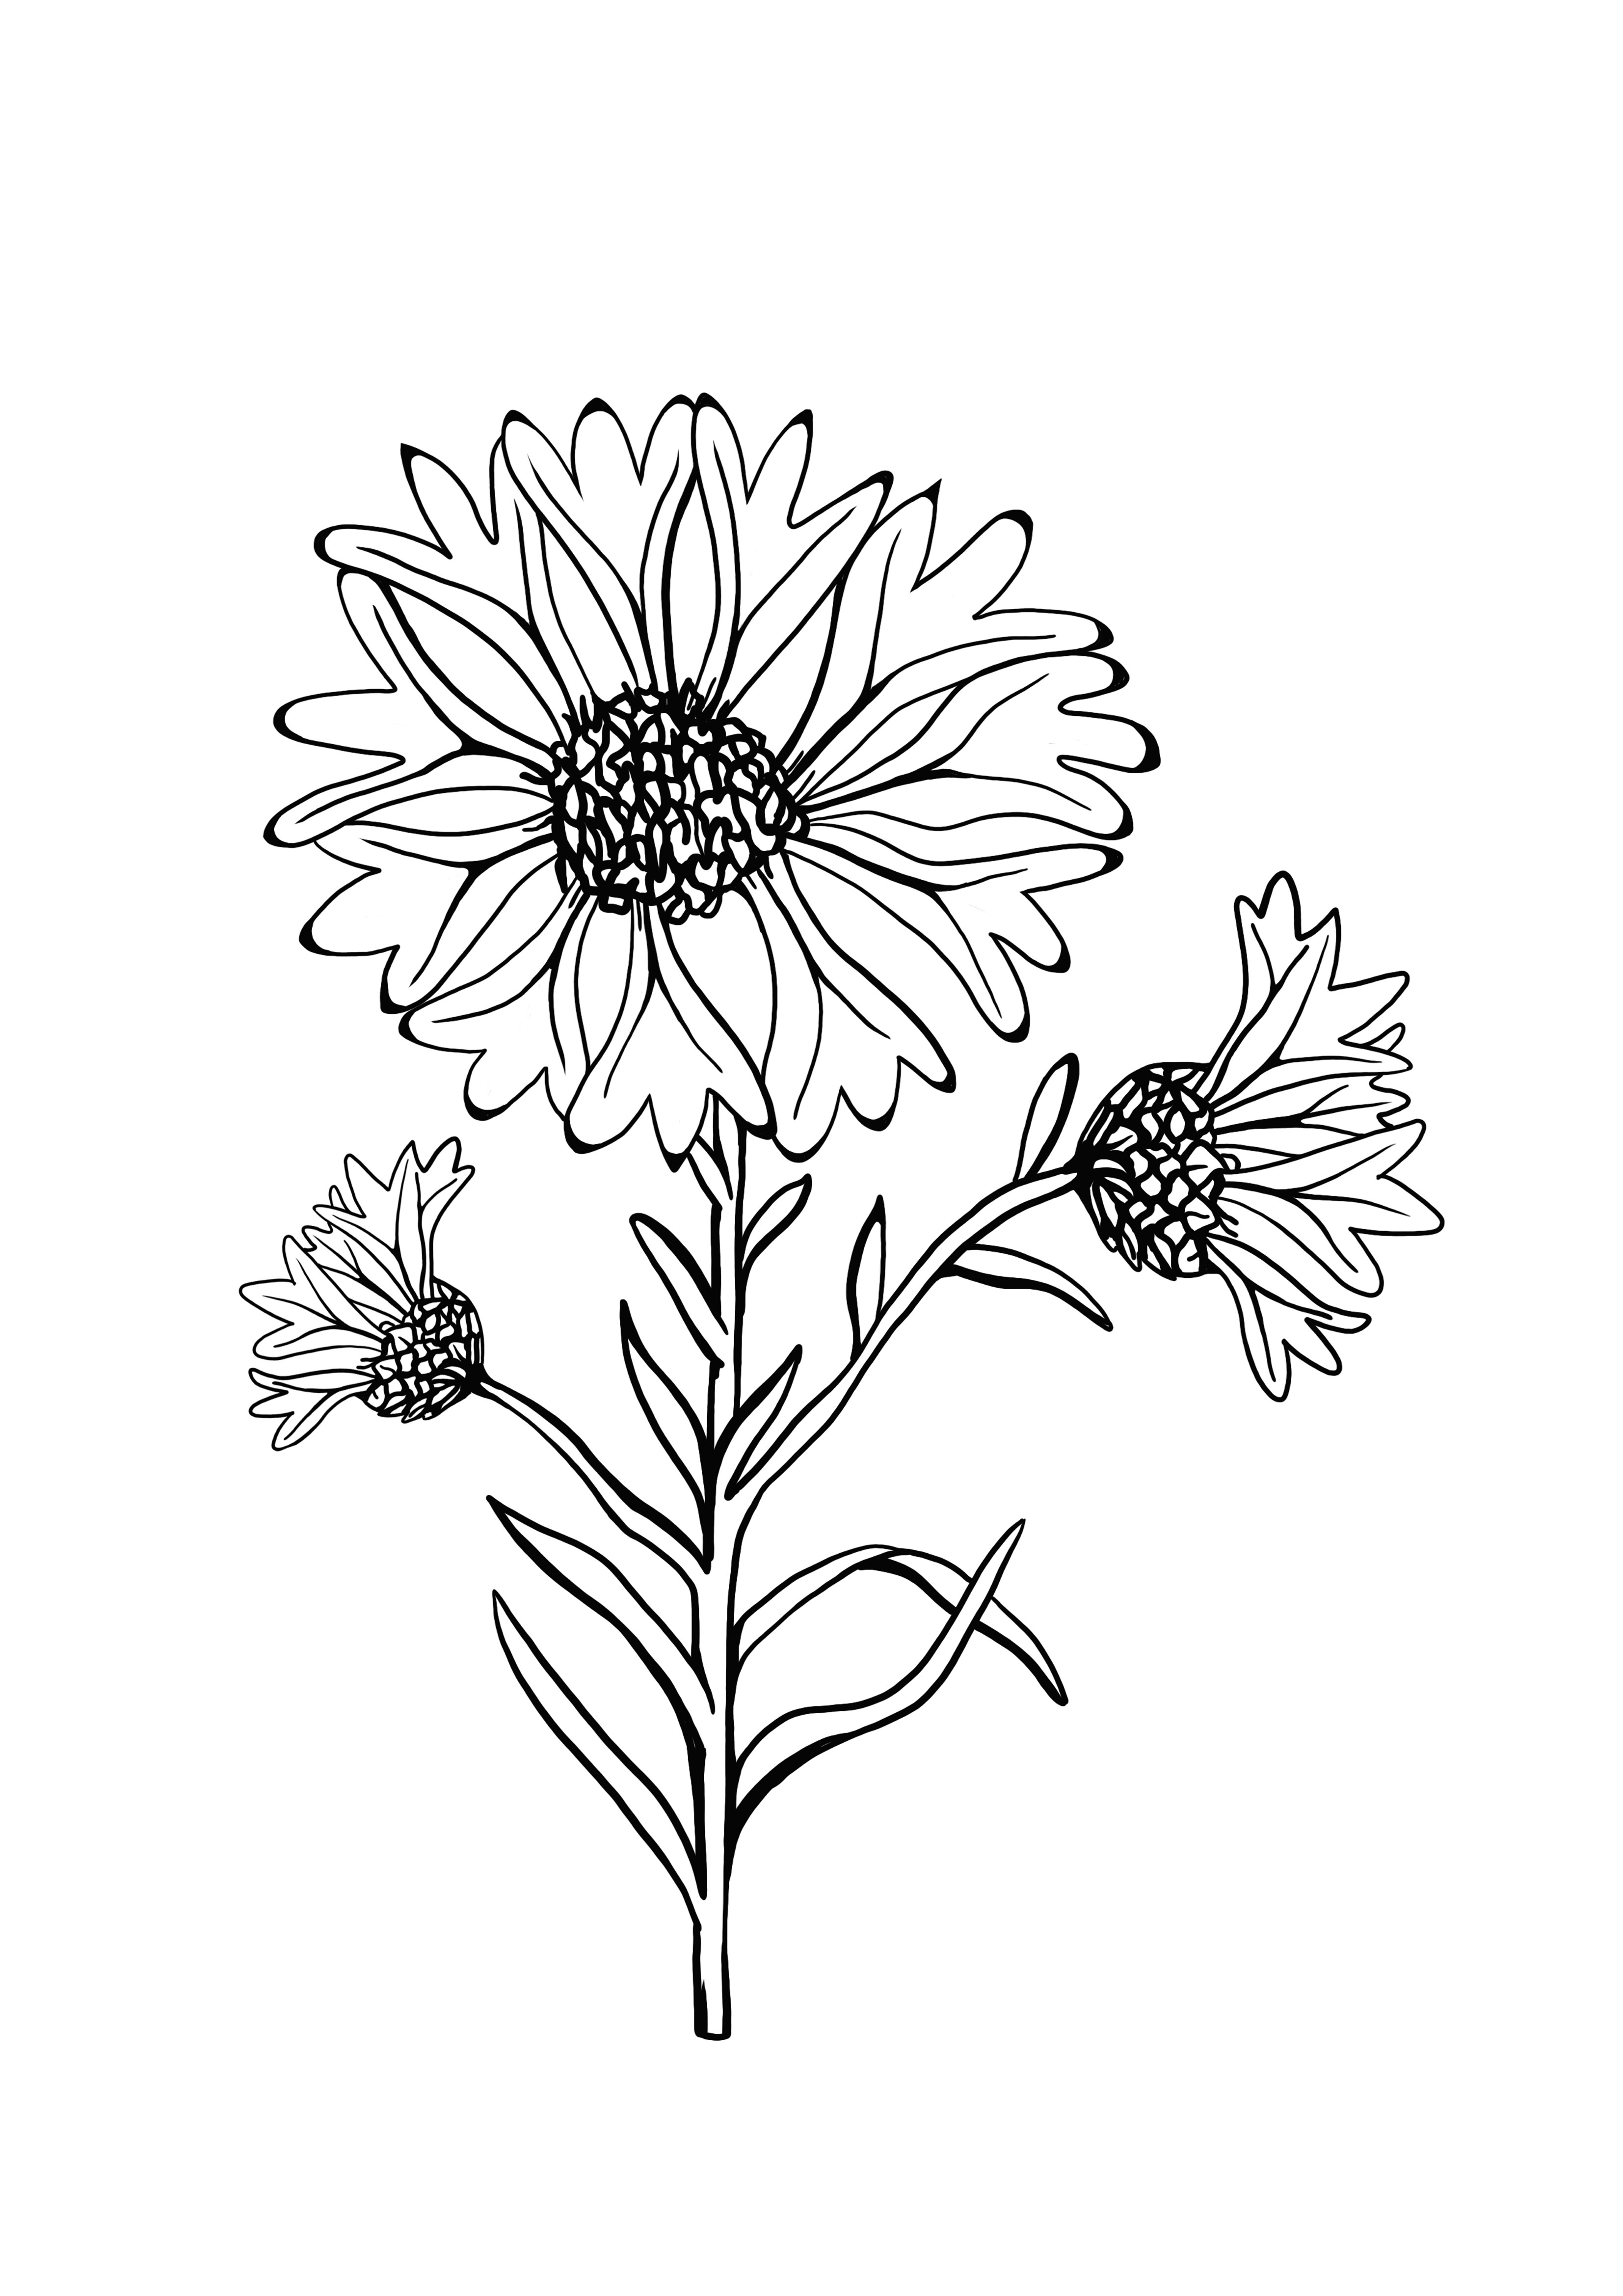 Cornflower coloring and printing image